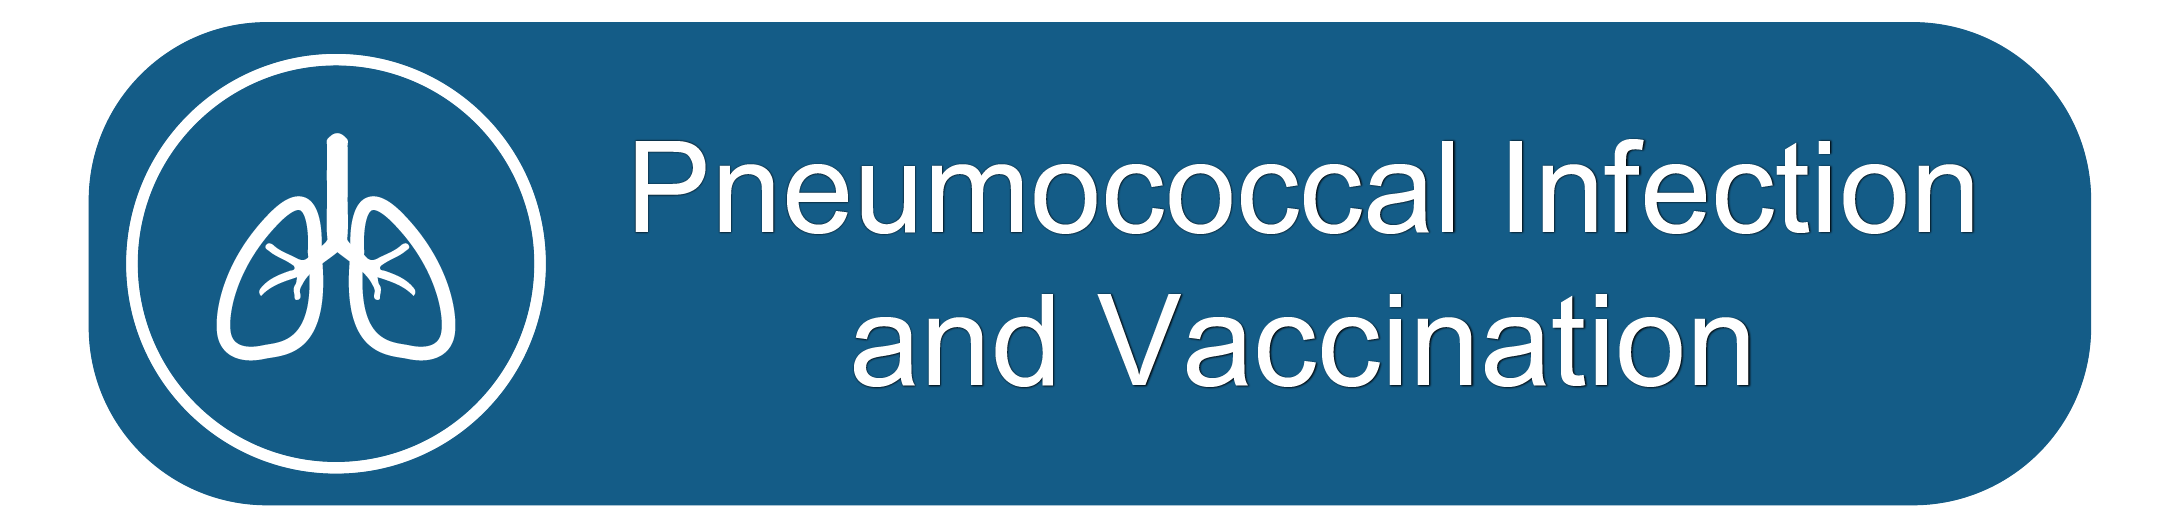 Pneumococcal Infection and Vaccination